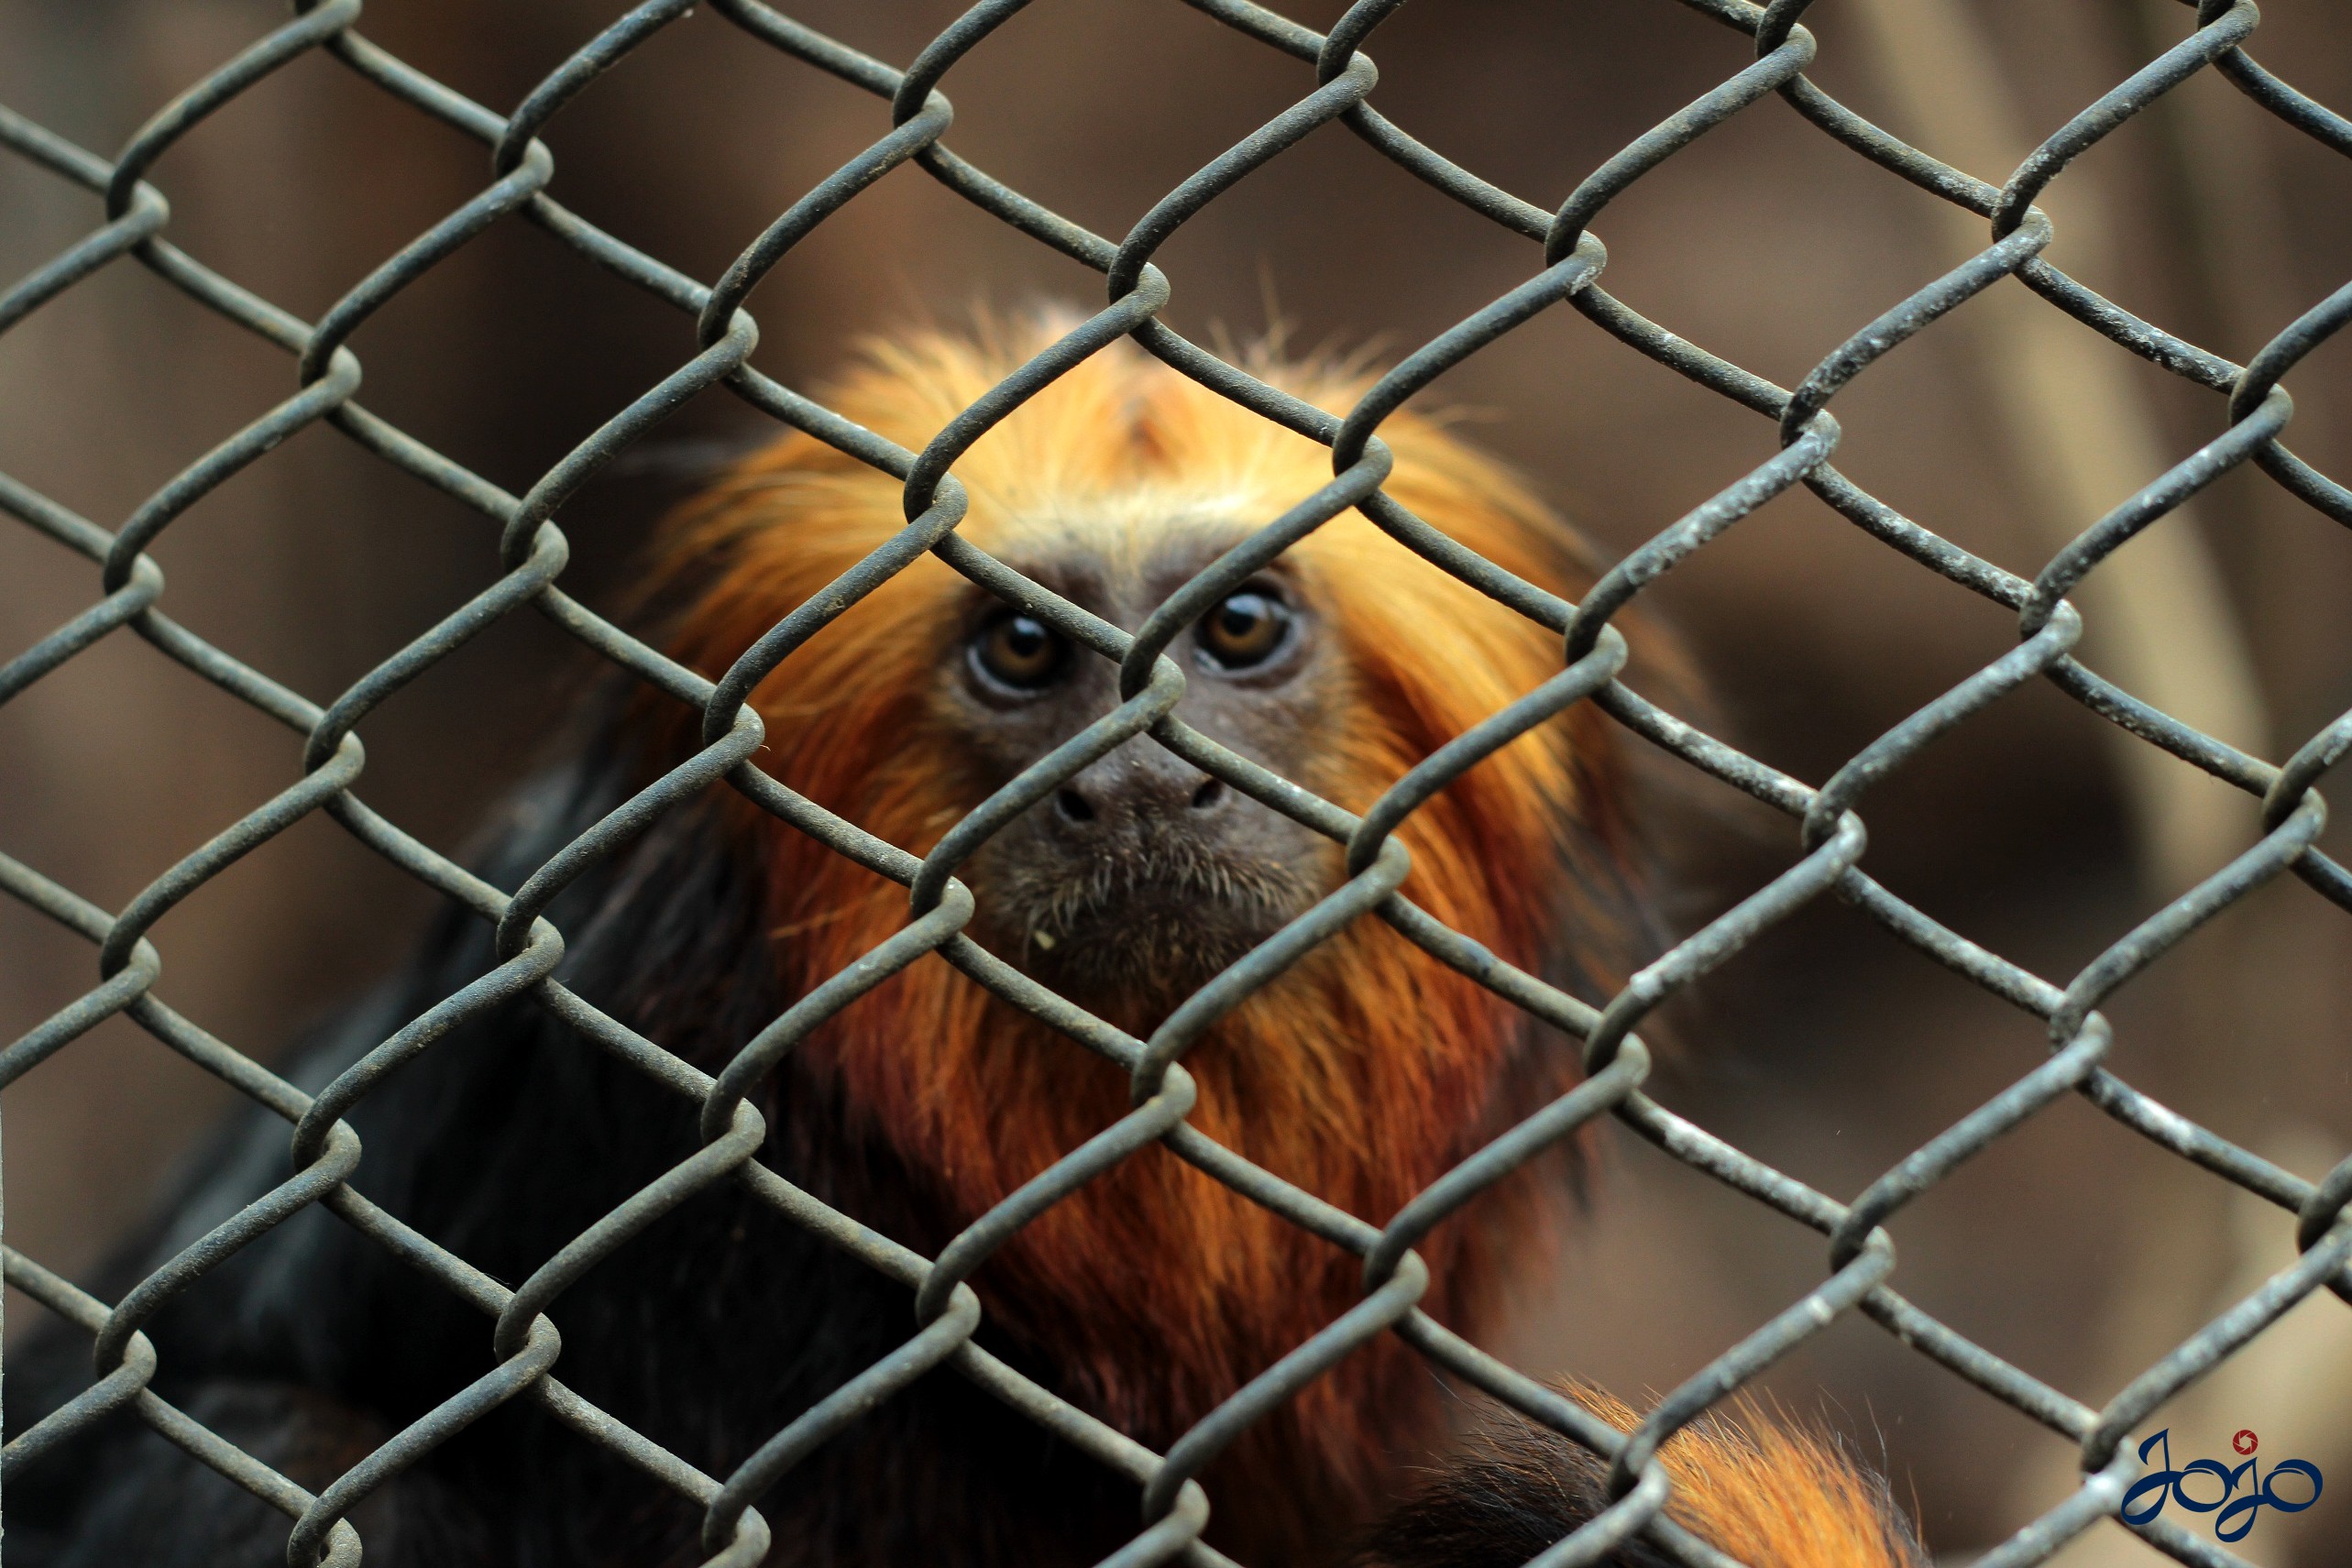 General 2566x1711 animals monkey cages apes closeup watermarked depth of field fur looking at viewer fence